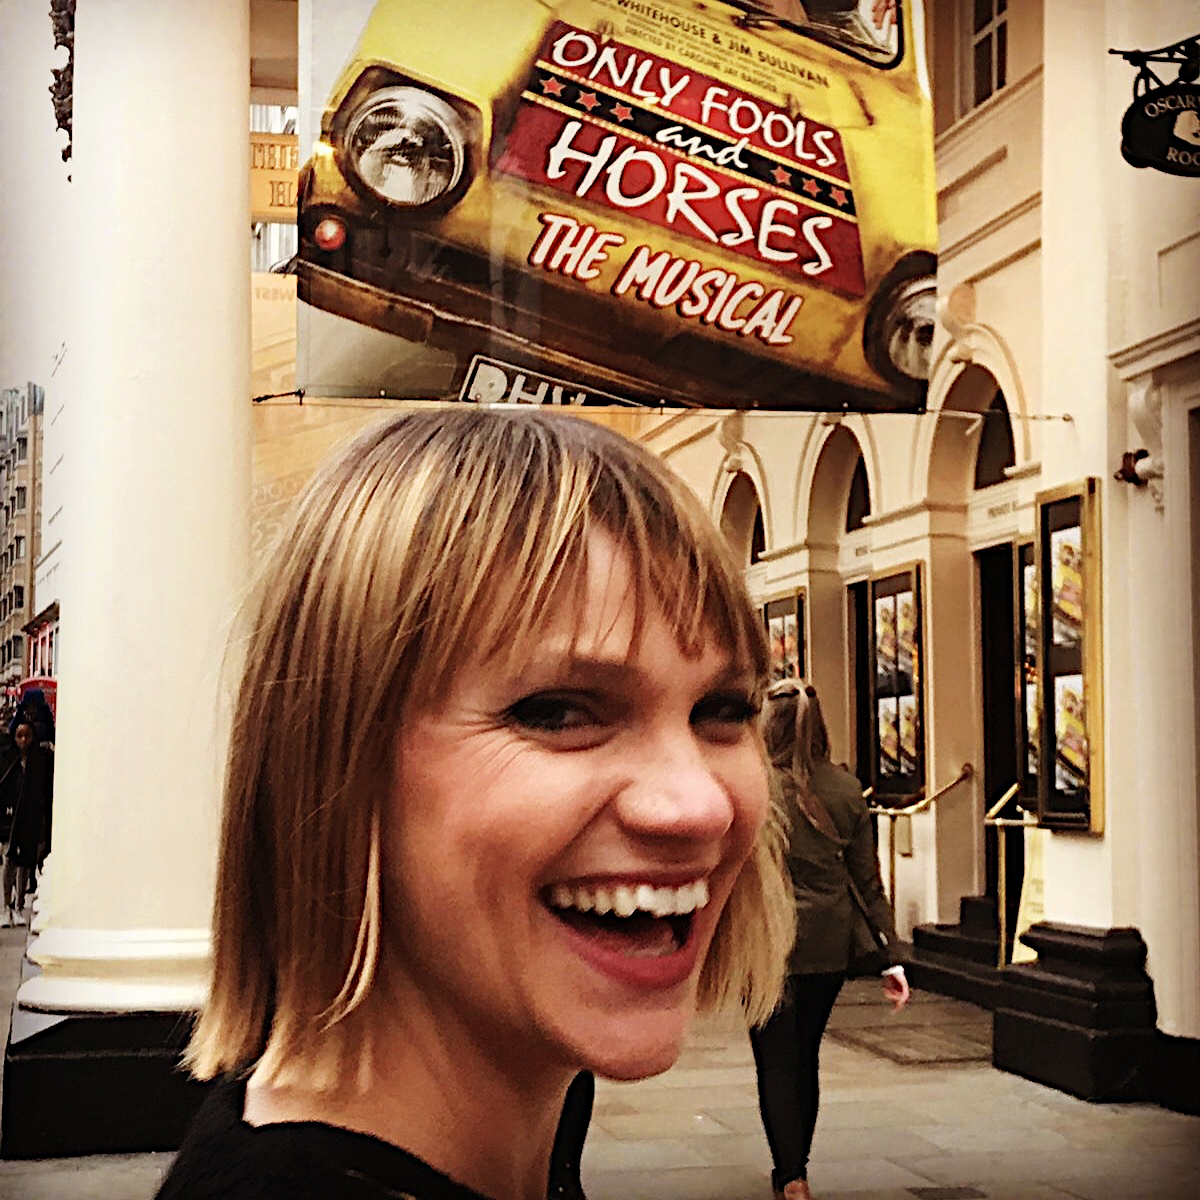 Pippa in street under sign for Only Fools and Horses